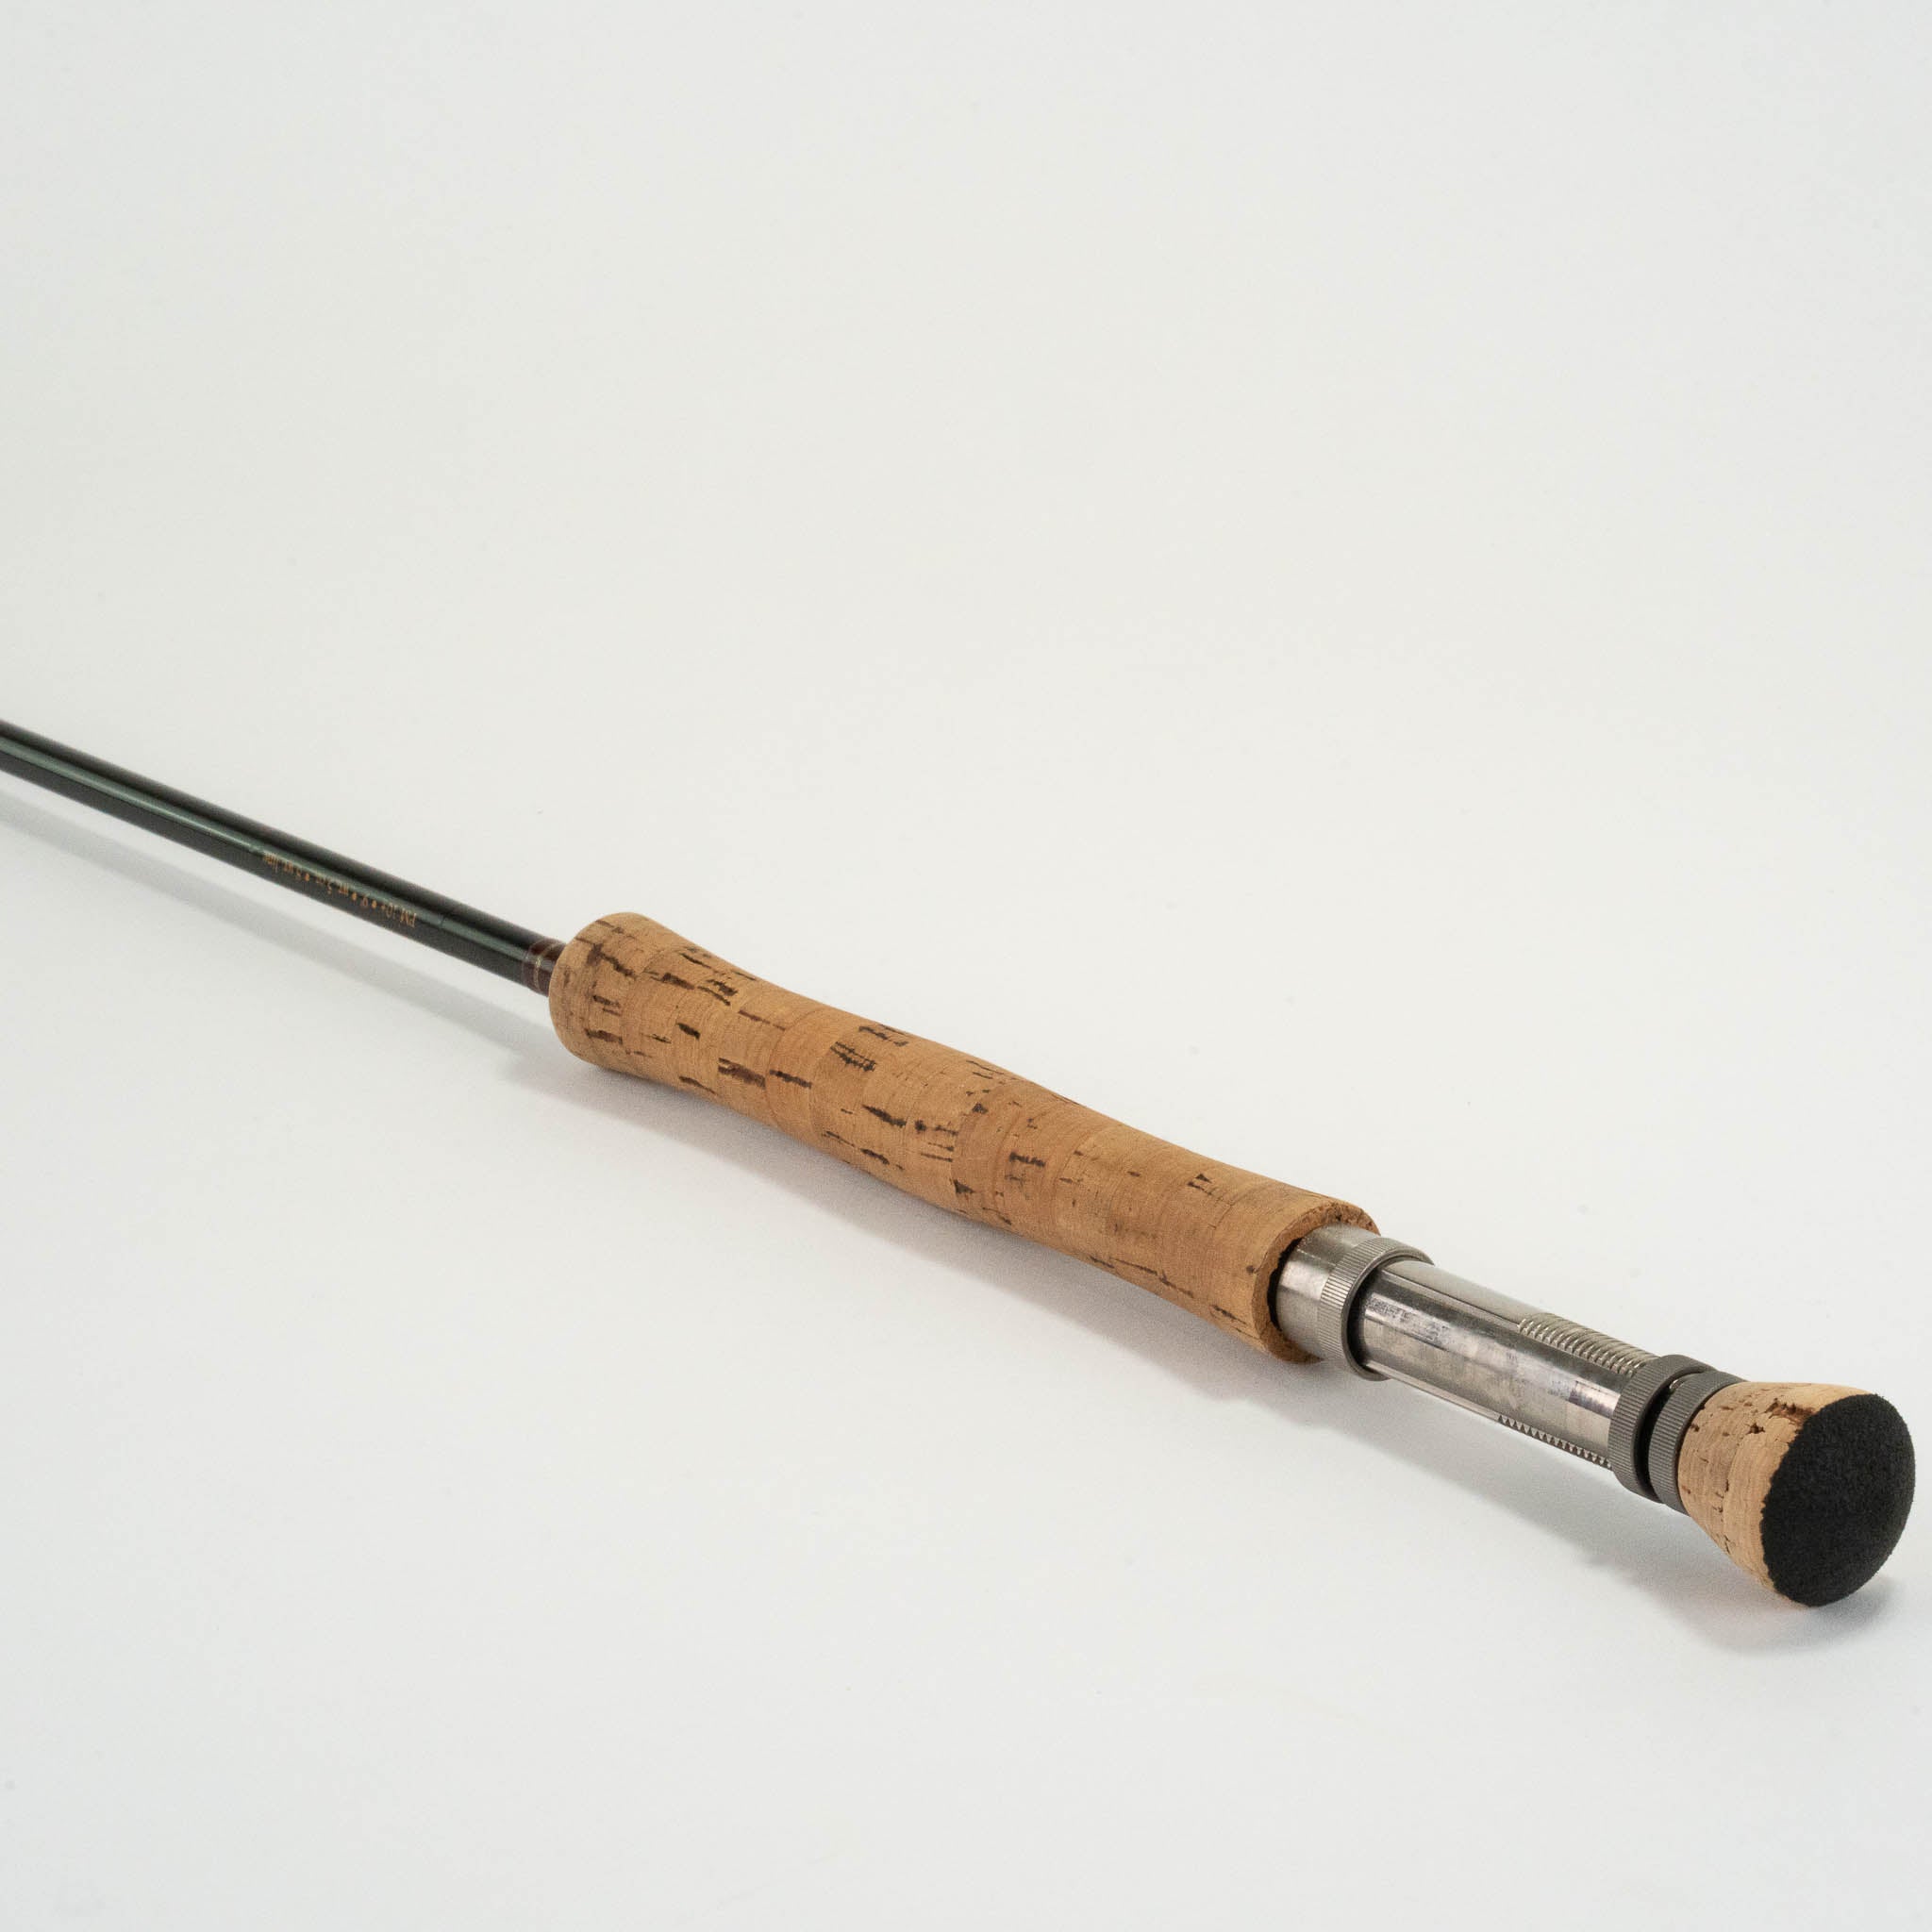 Orvis Trident PM 10 Plus 890-2 Fly Rod - 8wt 9ft 0in 2pc – Outfishers